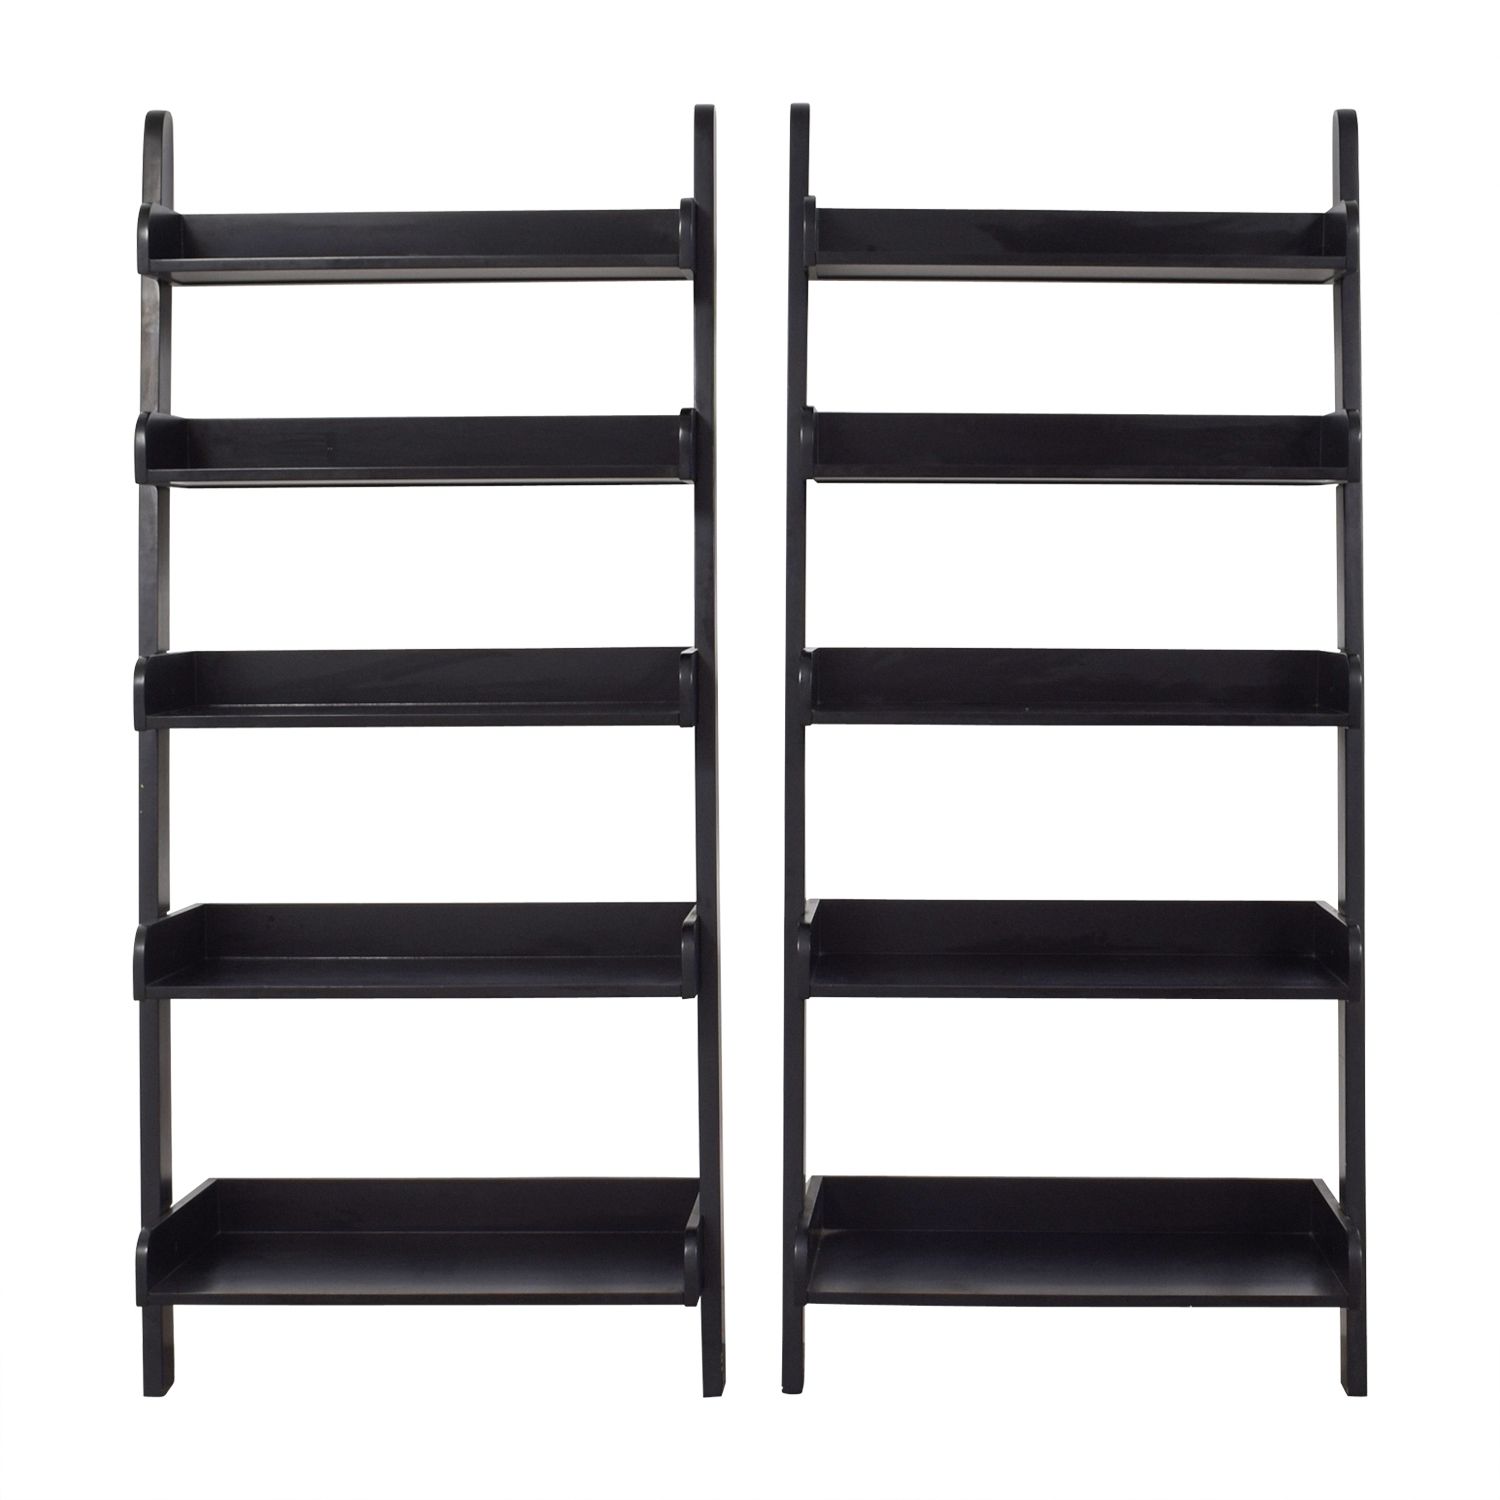 [%81% Off – Crate & Barrel Crate & Barrel Five Shelf Black Wood Throughout Most Current Crate And Barrel Leaning Bookcases|crate And Barrel Leaning Bookcases With Regard To Preferred 81% Off – Crate & Barrel Crate & Barrel Five Shelf Black Wood|recent Crate And Barrel Leaning Bookcases Intended For 81% Off – Crate & Barrel Crate & Barrel Five Shelf Black Wood|best And Newest 81% Off – Crate & Barrel Crate & Barrel Five Shelf Black Wood Intended For Crate And Barrel Leaning Bookcases%] (View 2 of 15)